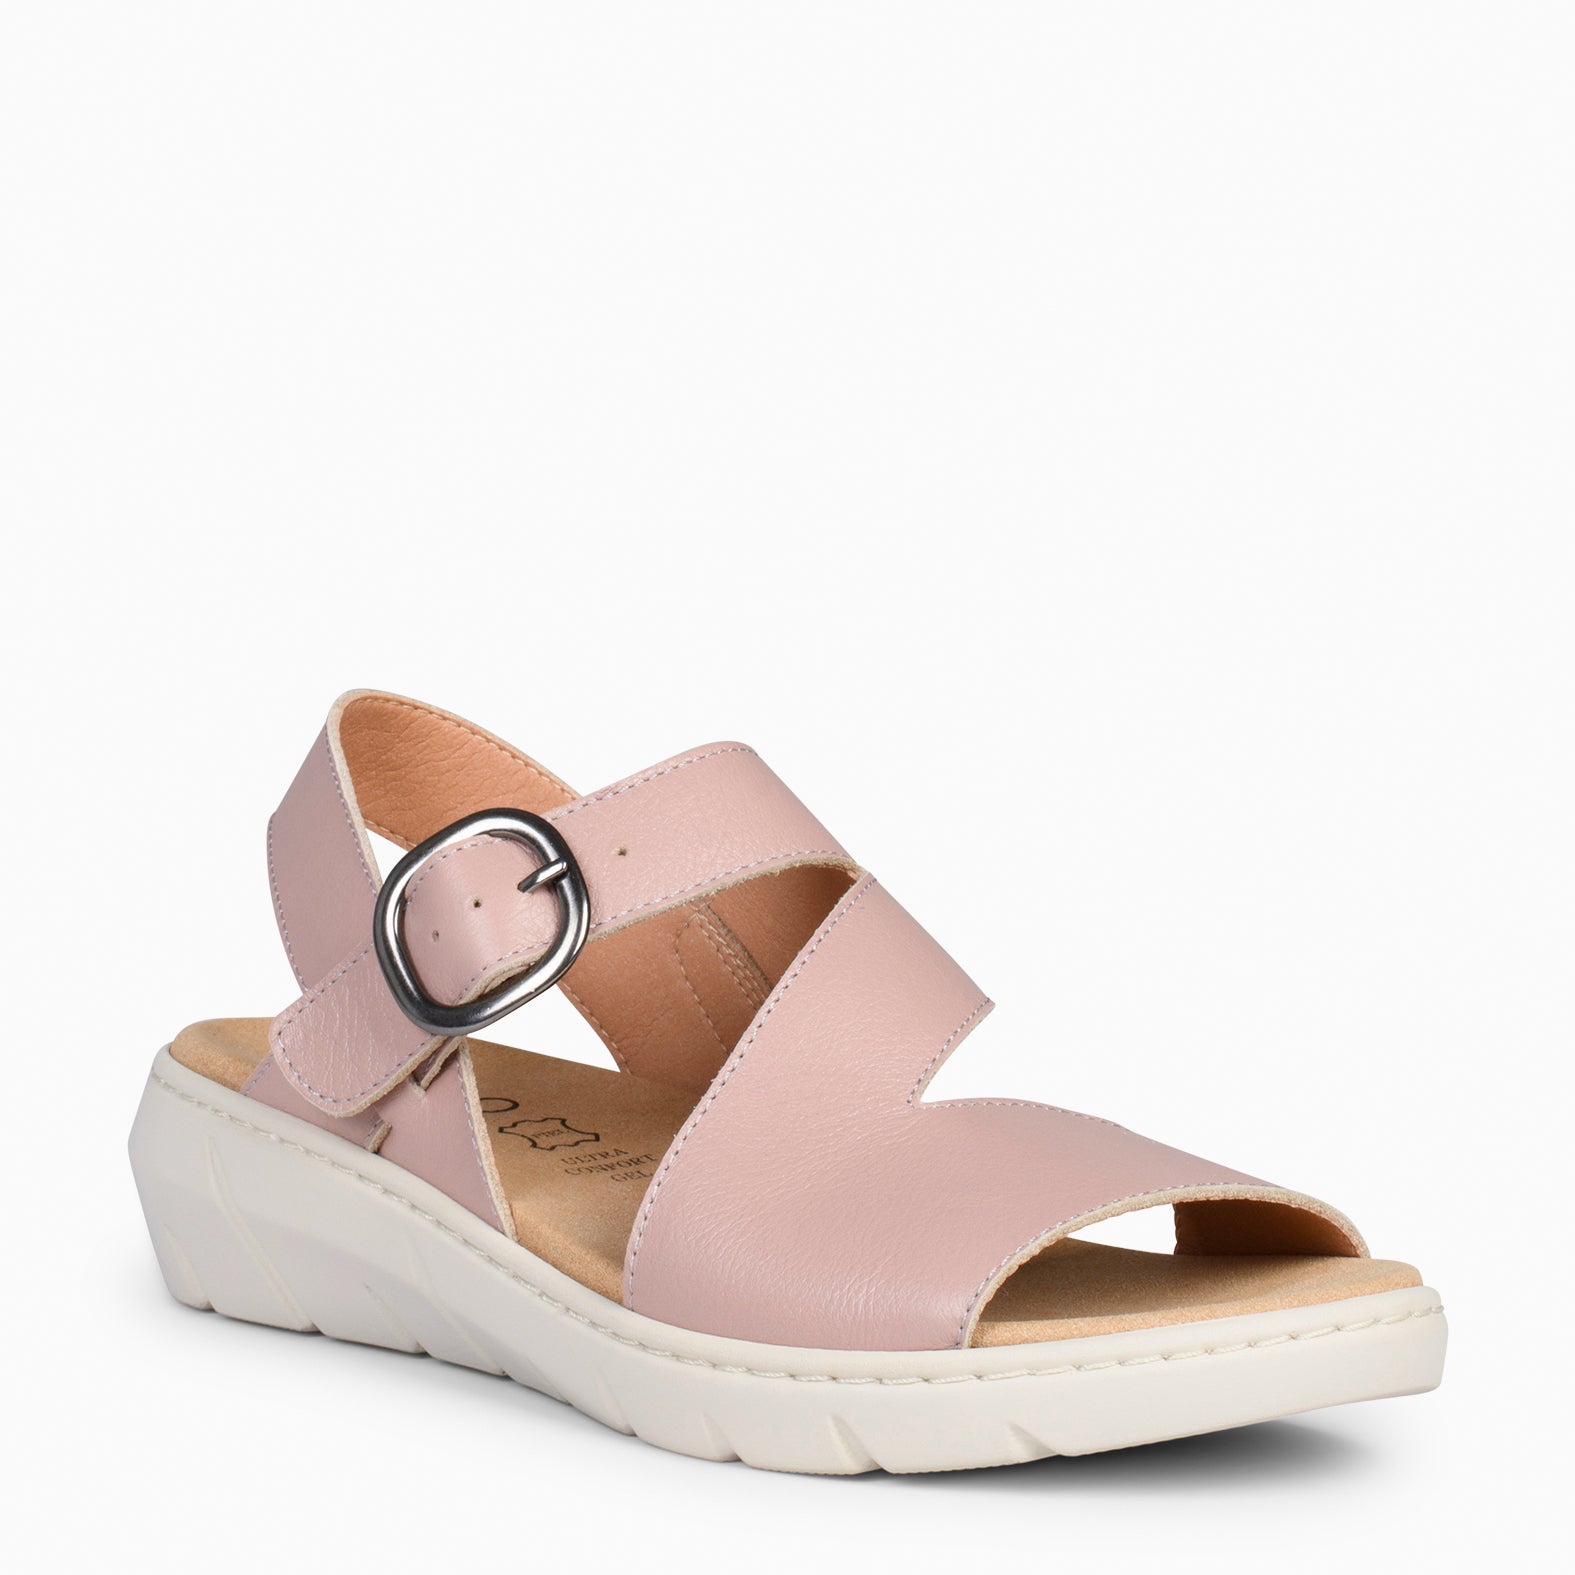 NATURA – NUDE sandals with removable insole